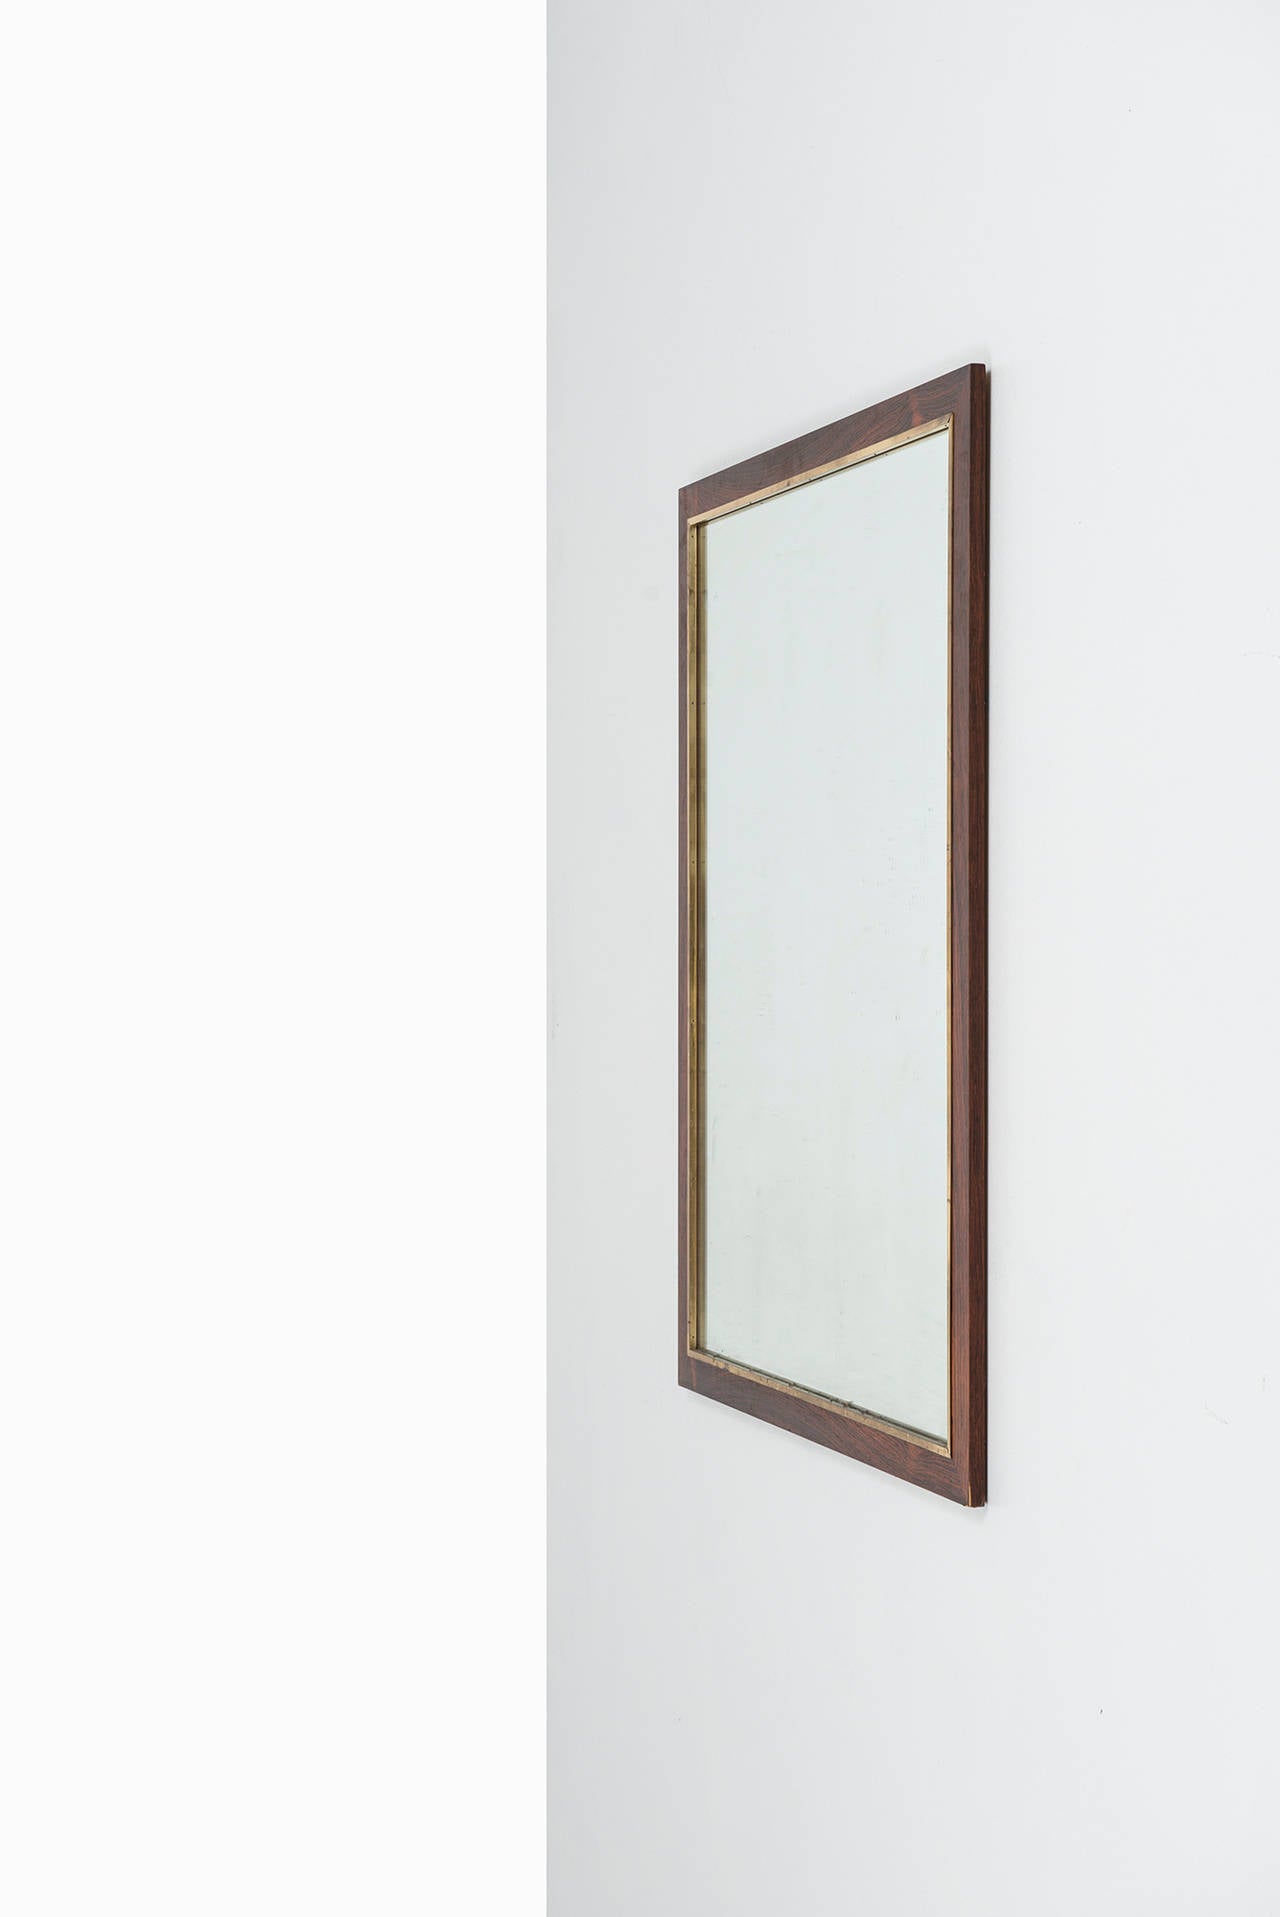 A large rosewood mirror with brass detail. Produced by Fröseke, AB Nybrofabriken in Sweden.